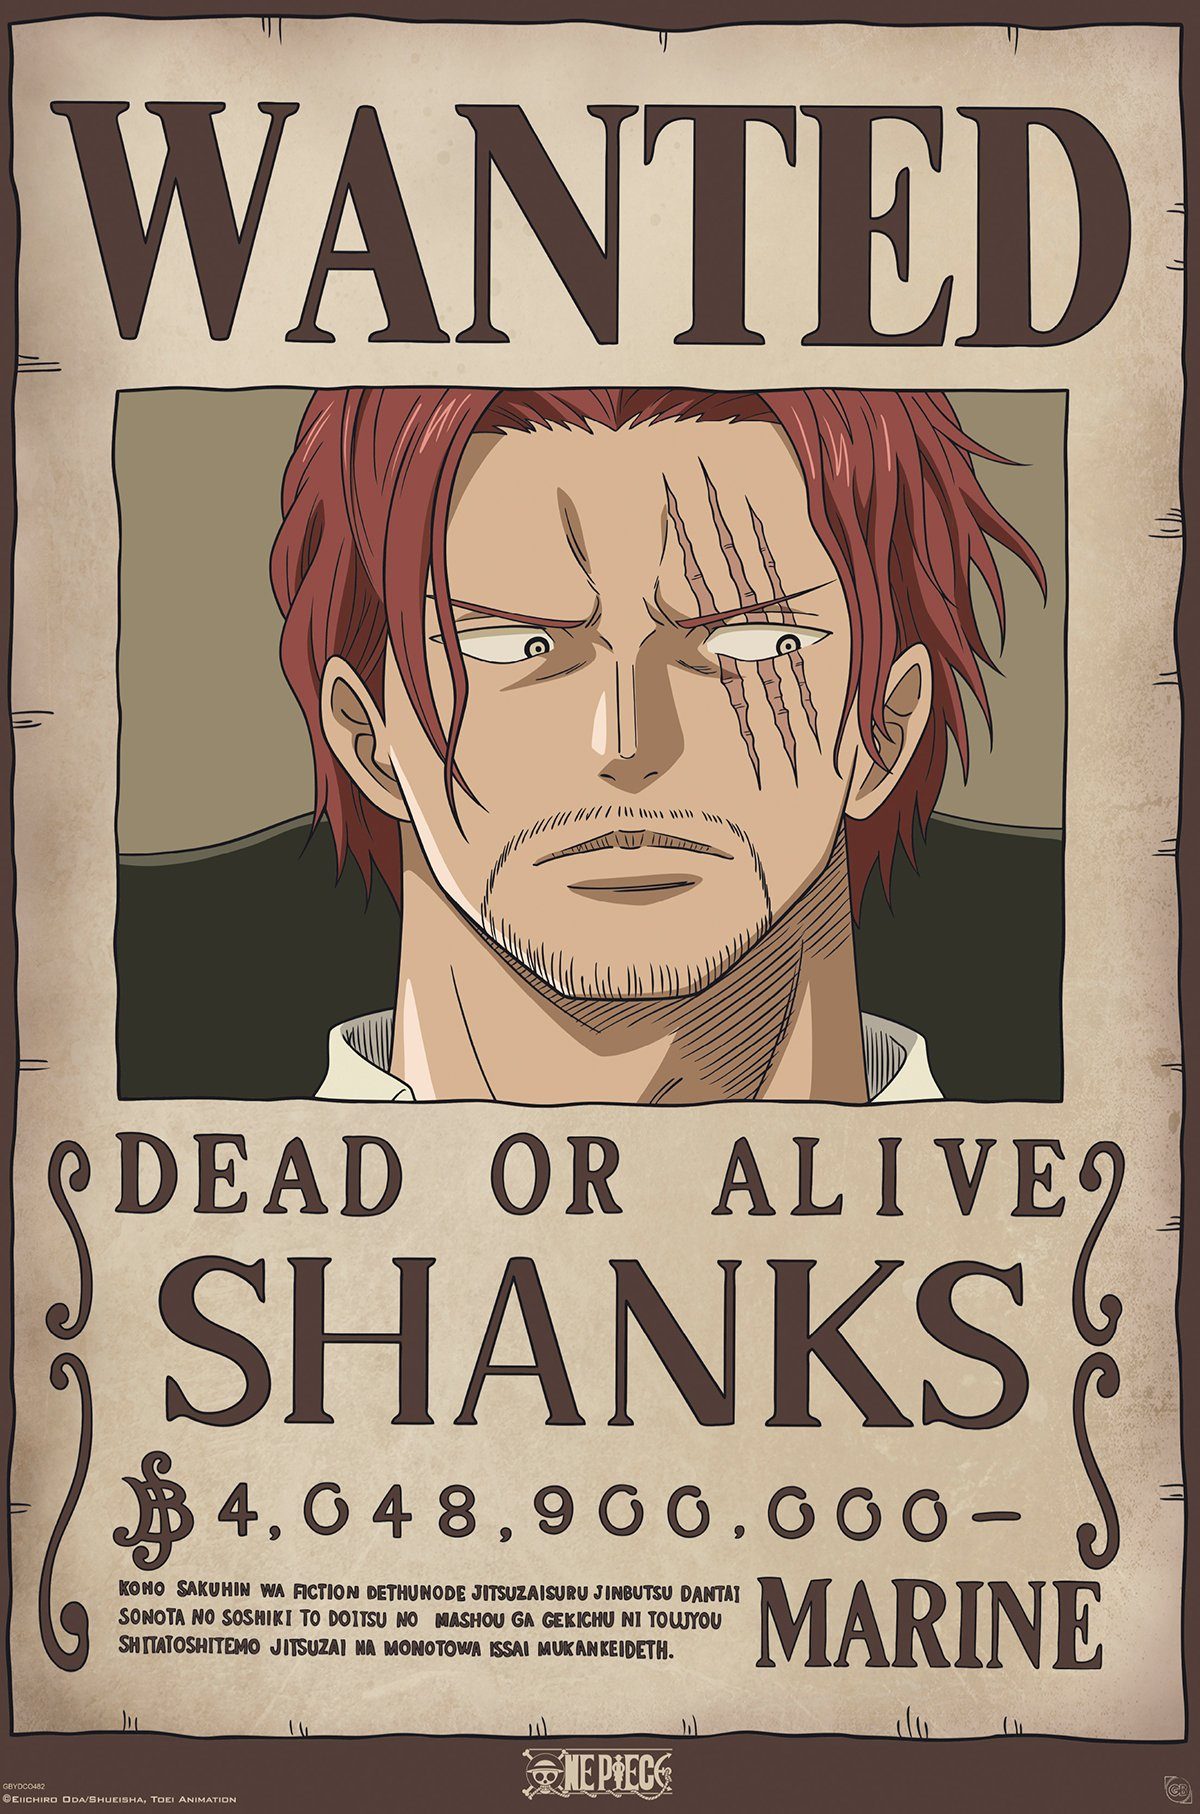 GB eye Poster One Piece Poster Wanted Shanks 61 x 91,5 cm